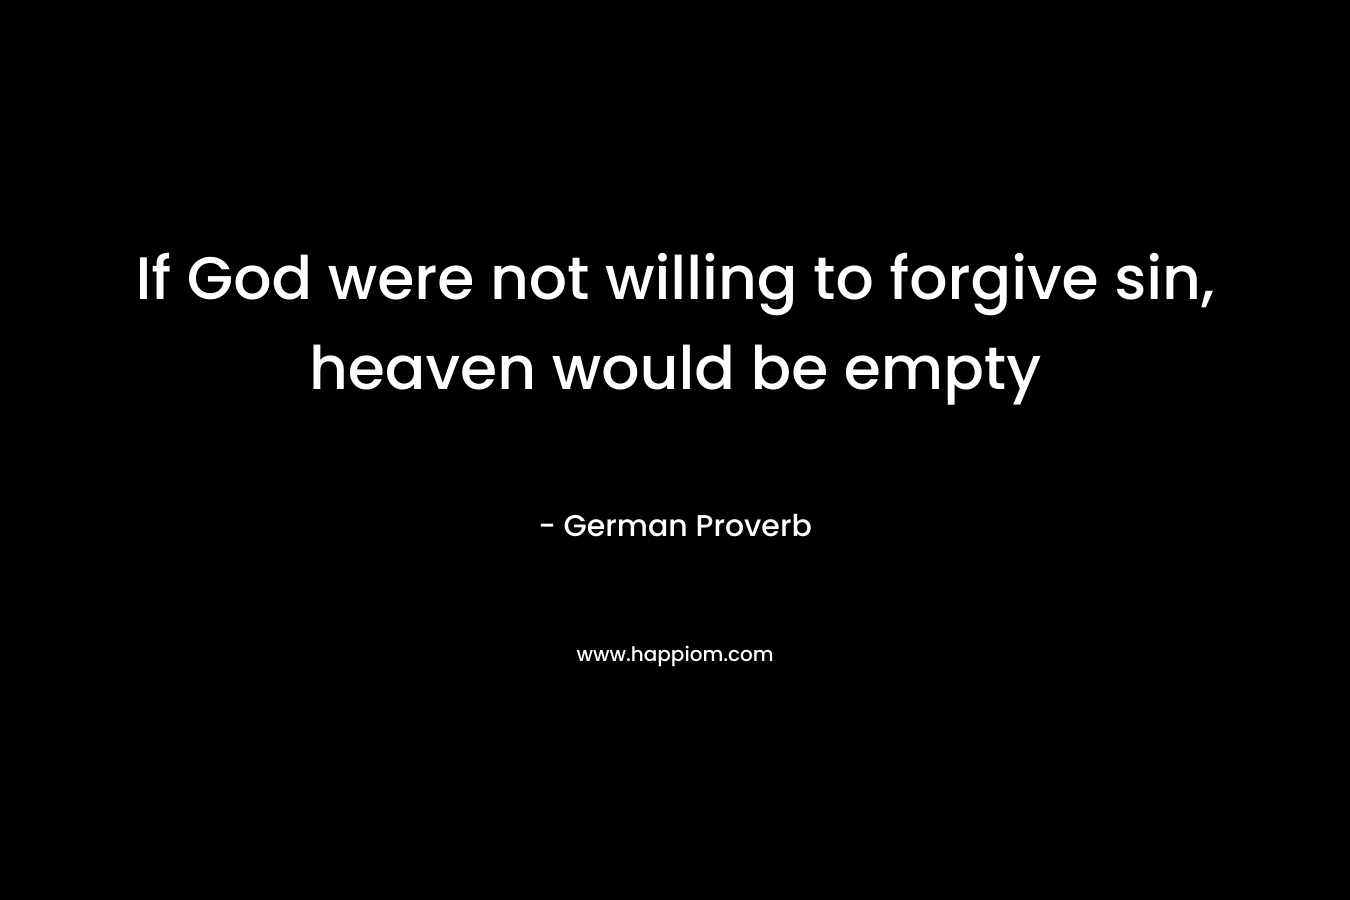 If God were not willing to forgive sin, heaven would be empty